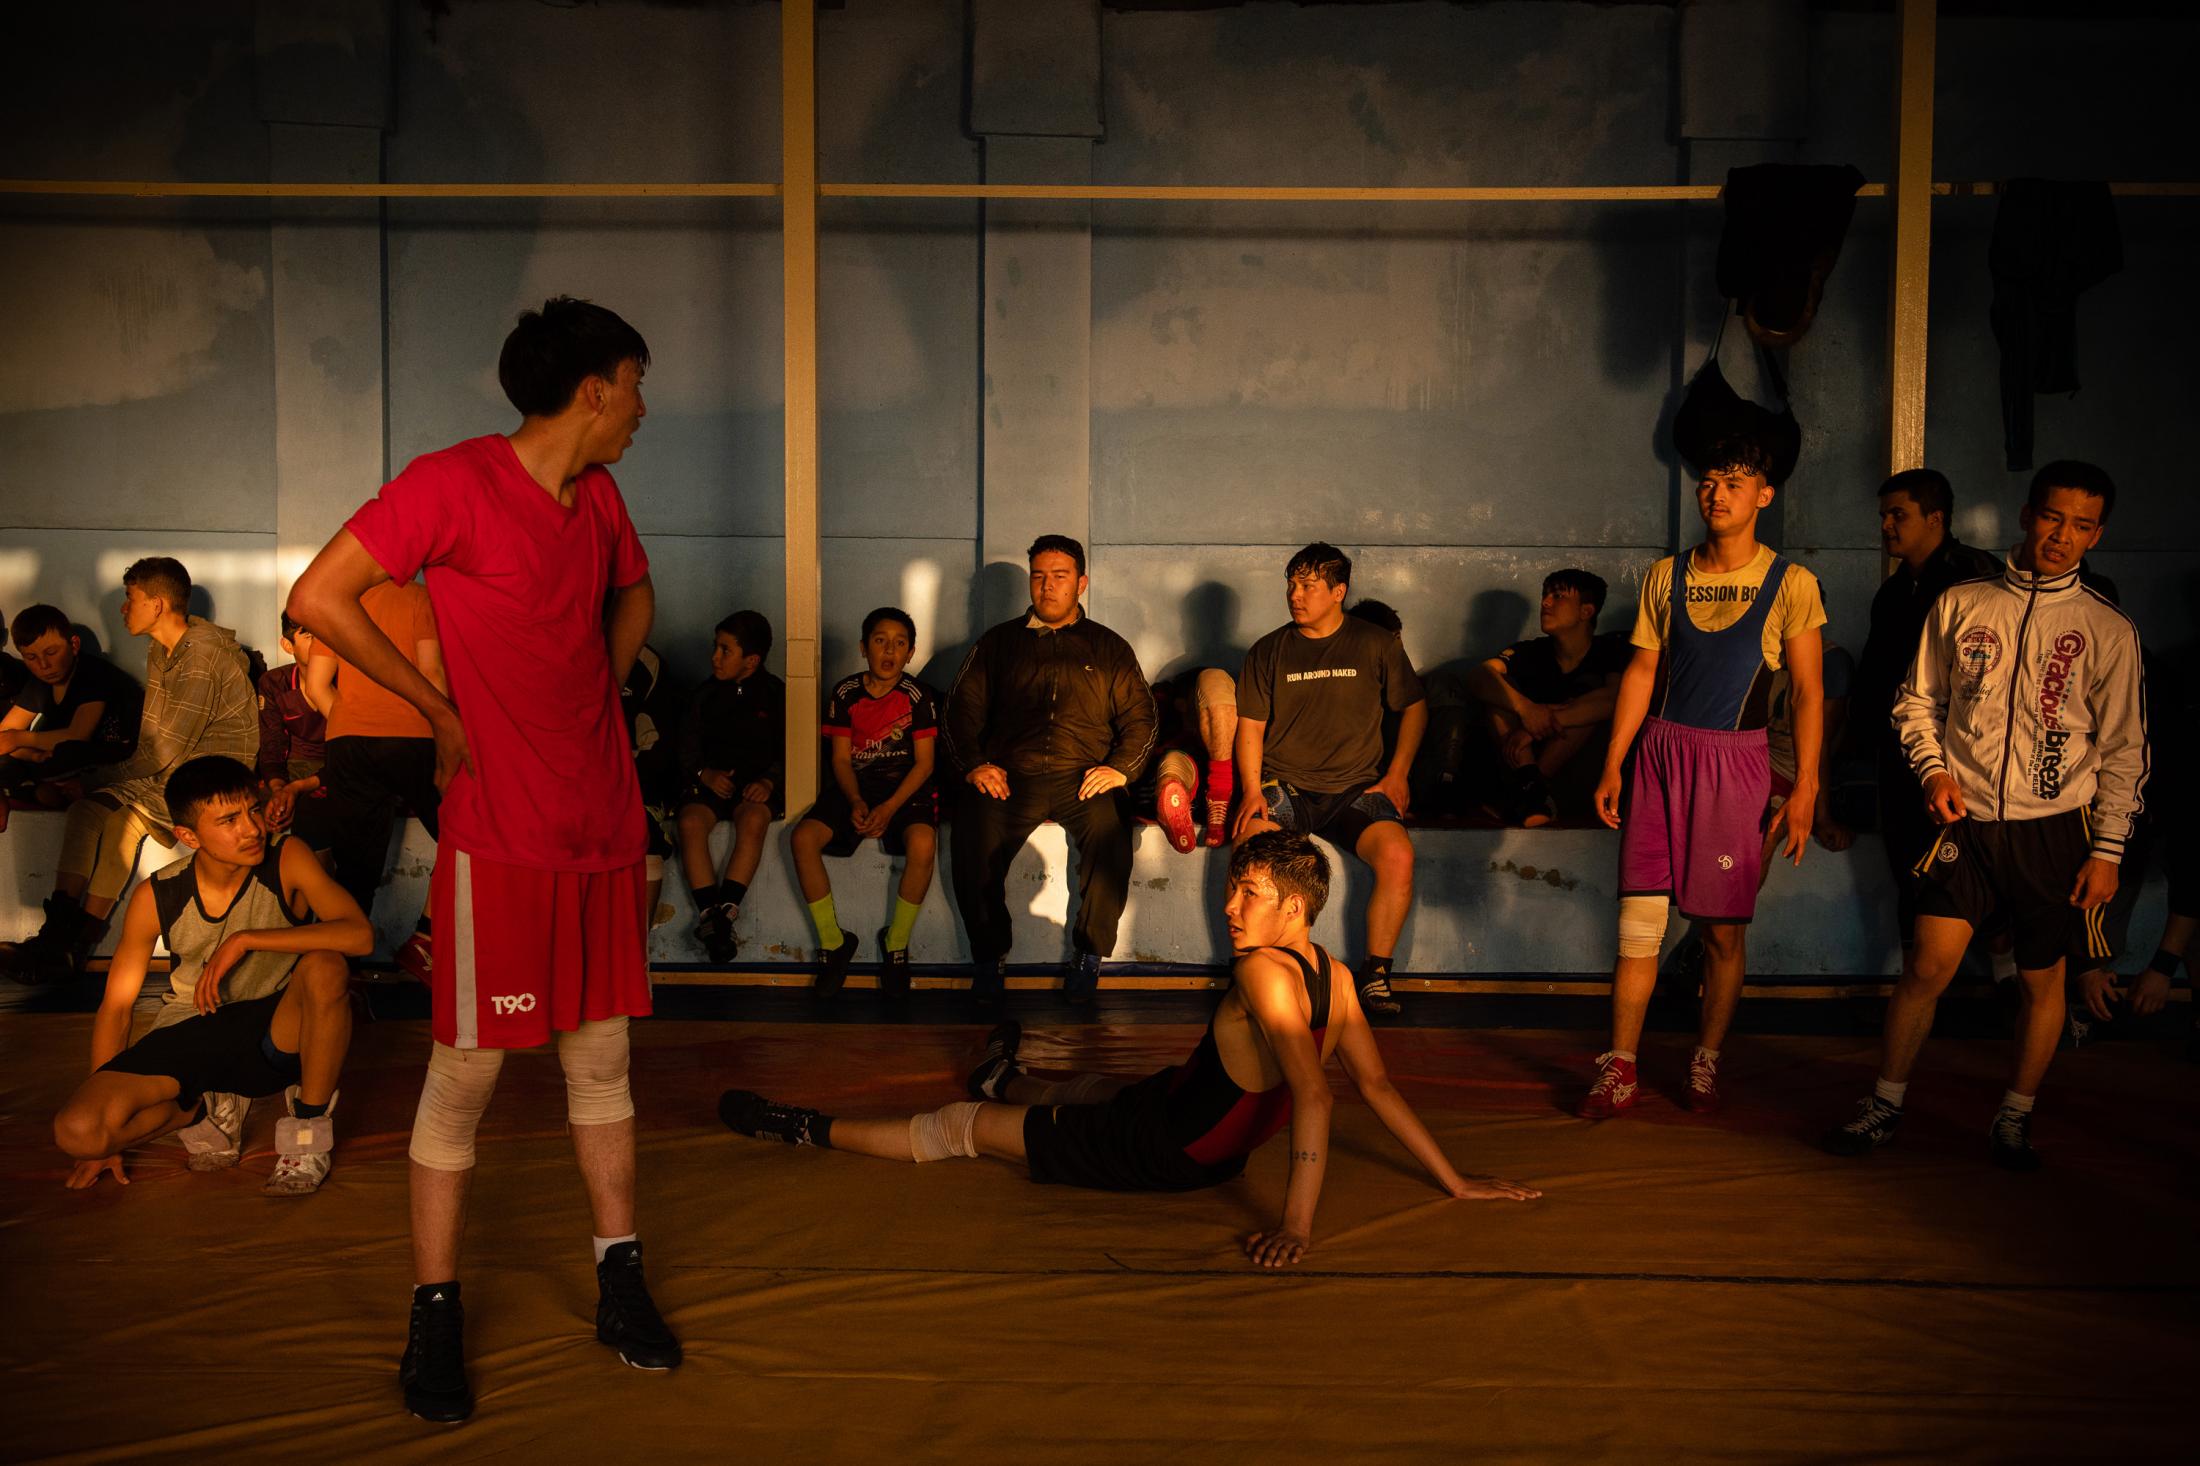 Bombed by ISIS, an Afghan Wrestling Club Is Back: "˜They Can"™t Stop Us"™ - KABUL | AFGHANISTAN | 2/6/19 | Members of Maiwand...